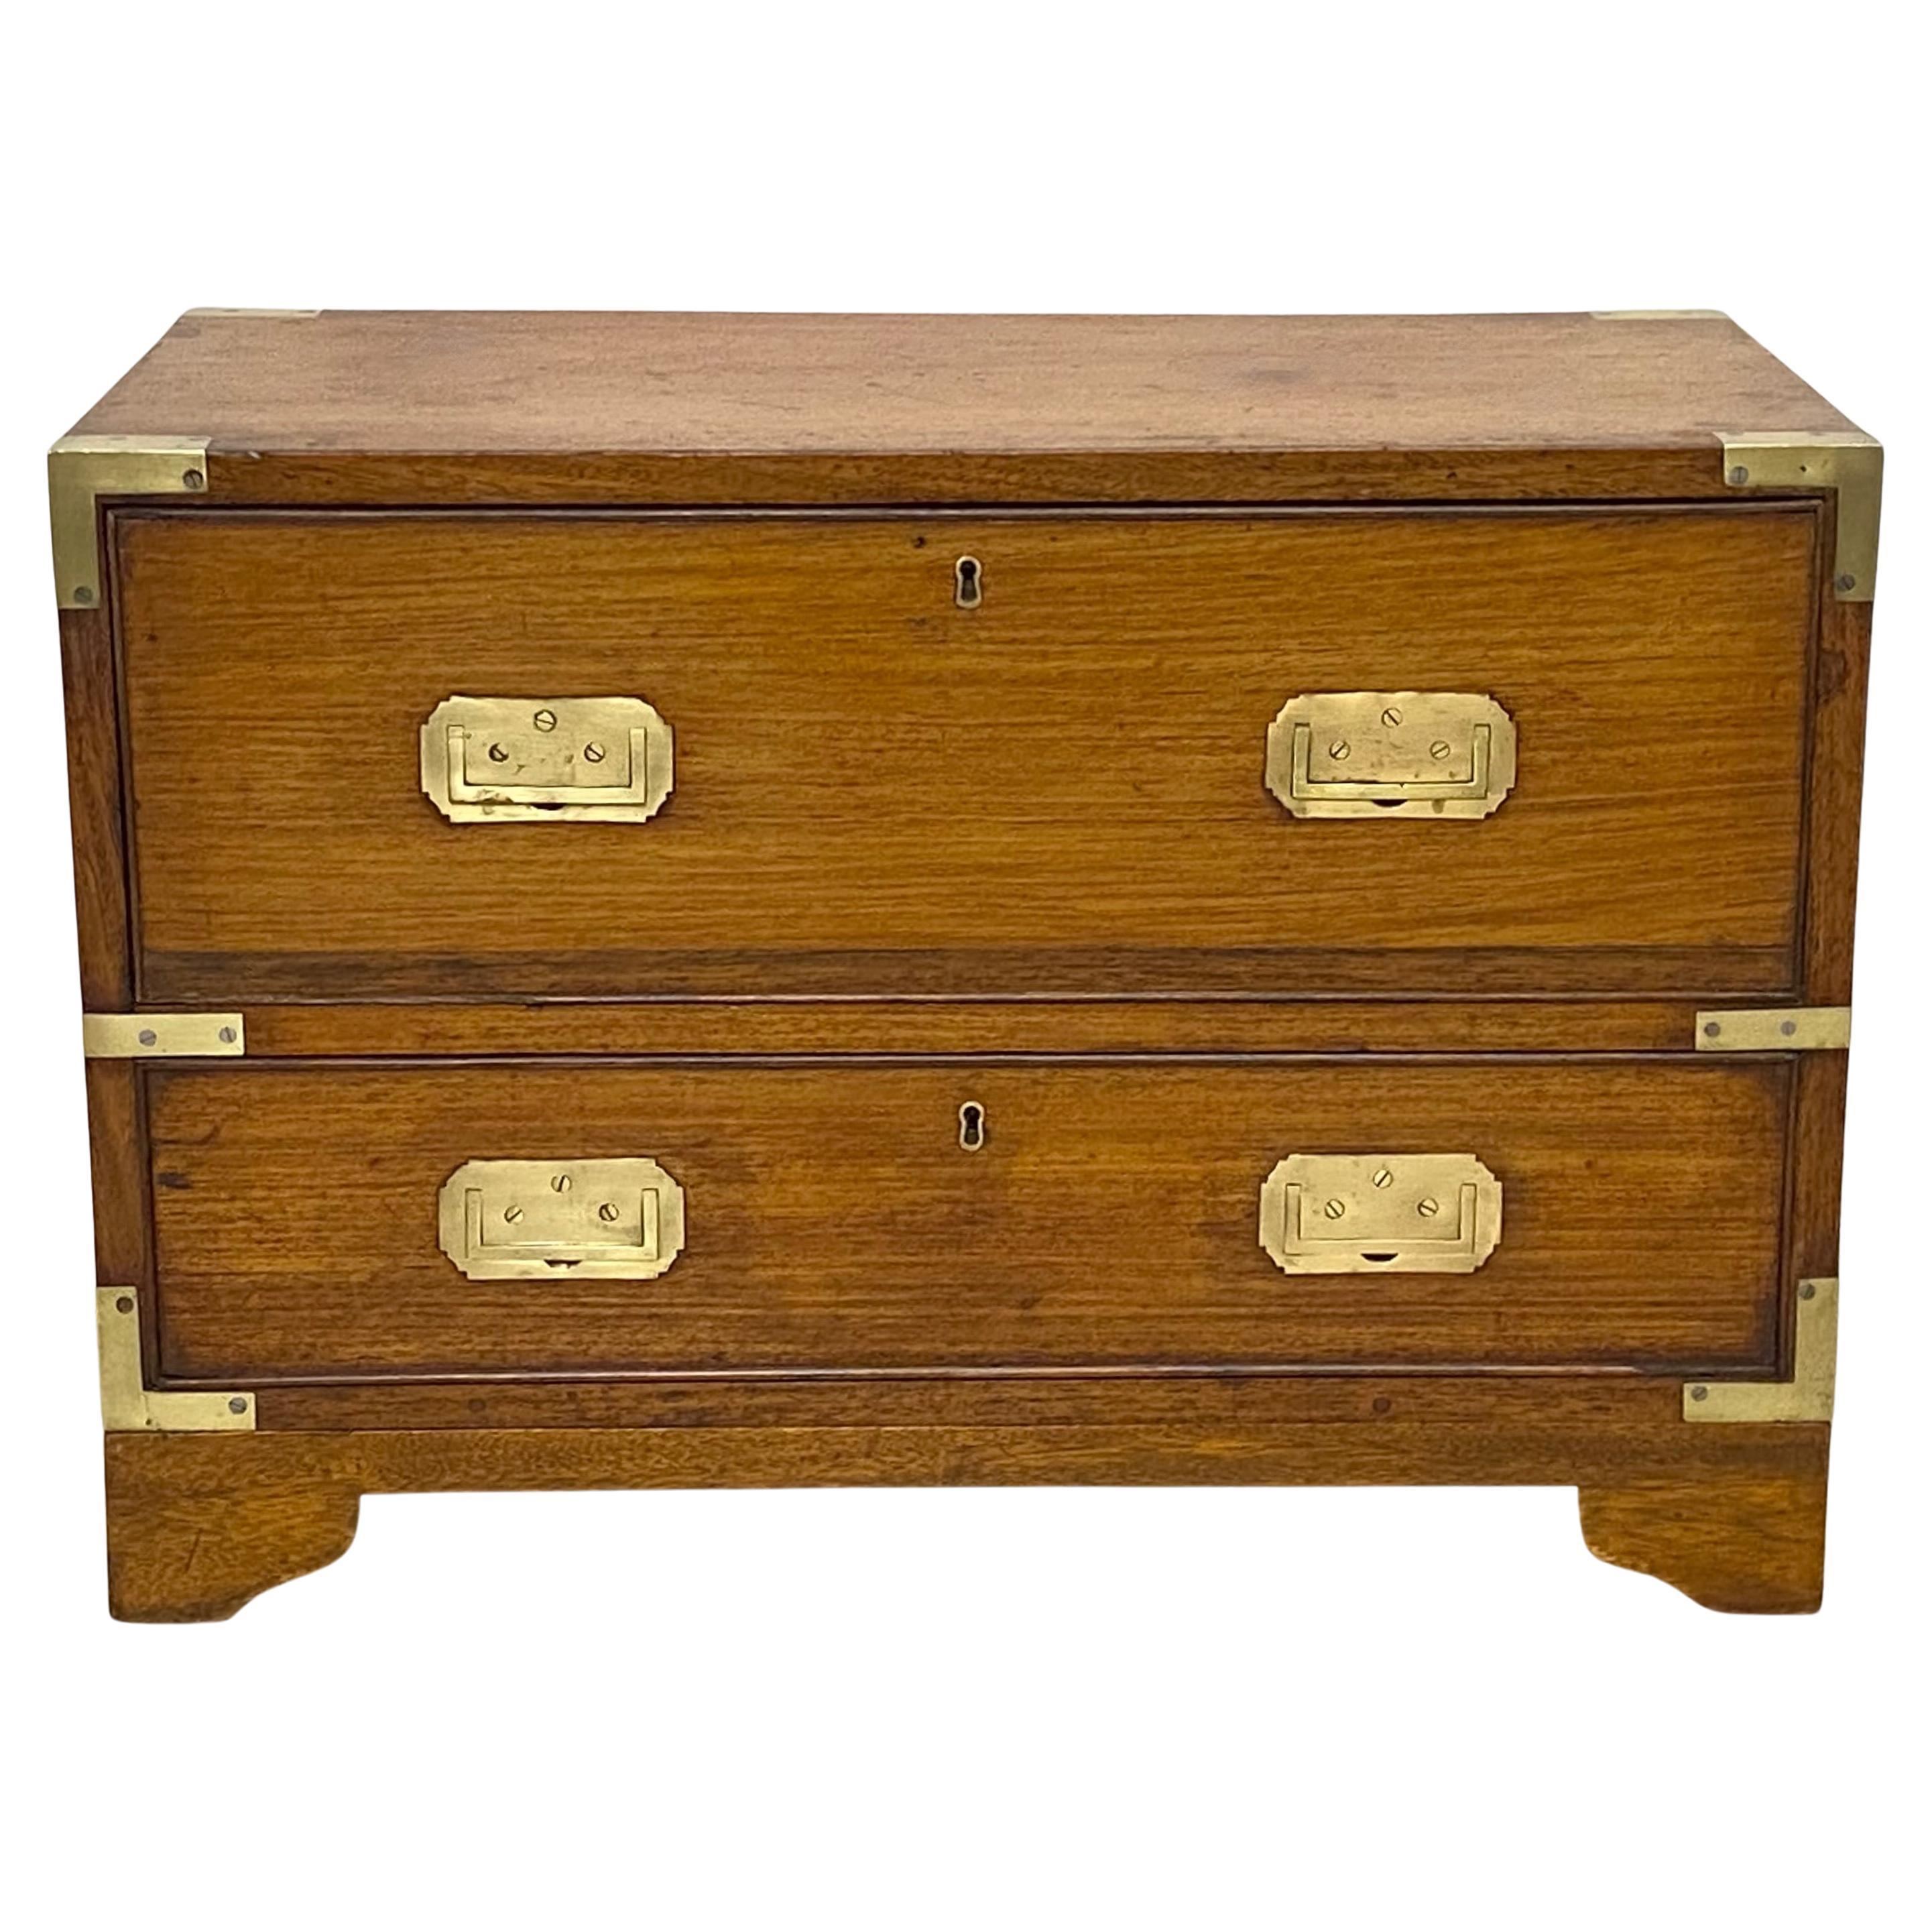 Teak and Mahogany Campaign Chest Coffee Table / Writing Desk, 19th Century For Sale